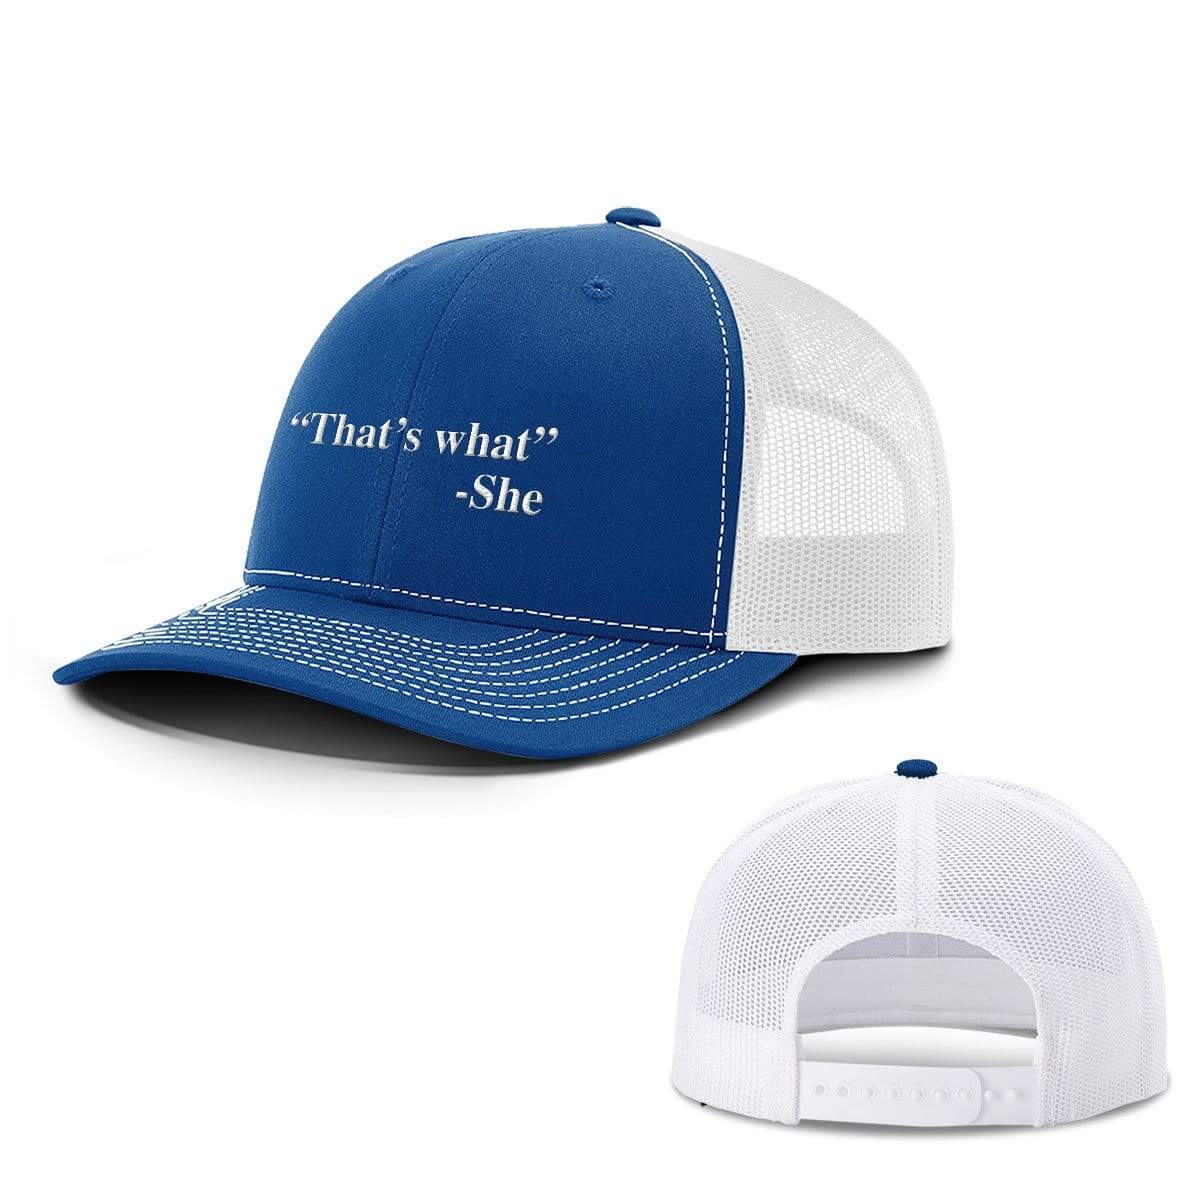 BustedTees.com Snapback / Royal Blue and White / One Size That's What She Said Hats